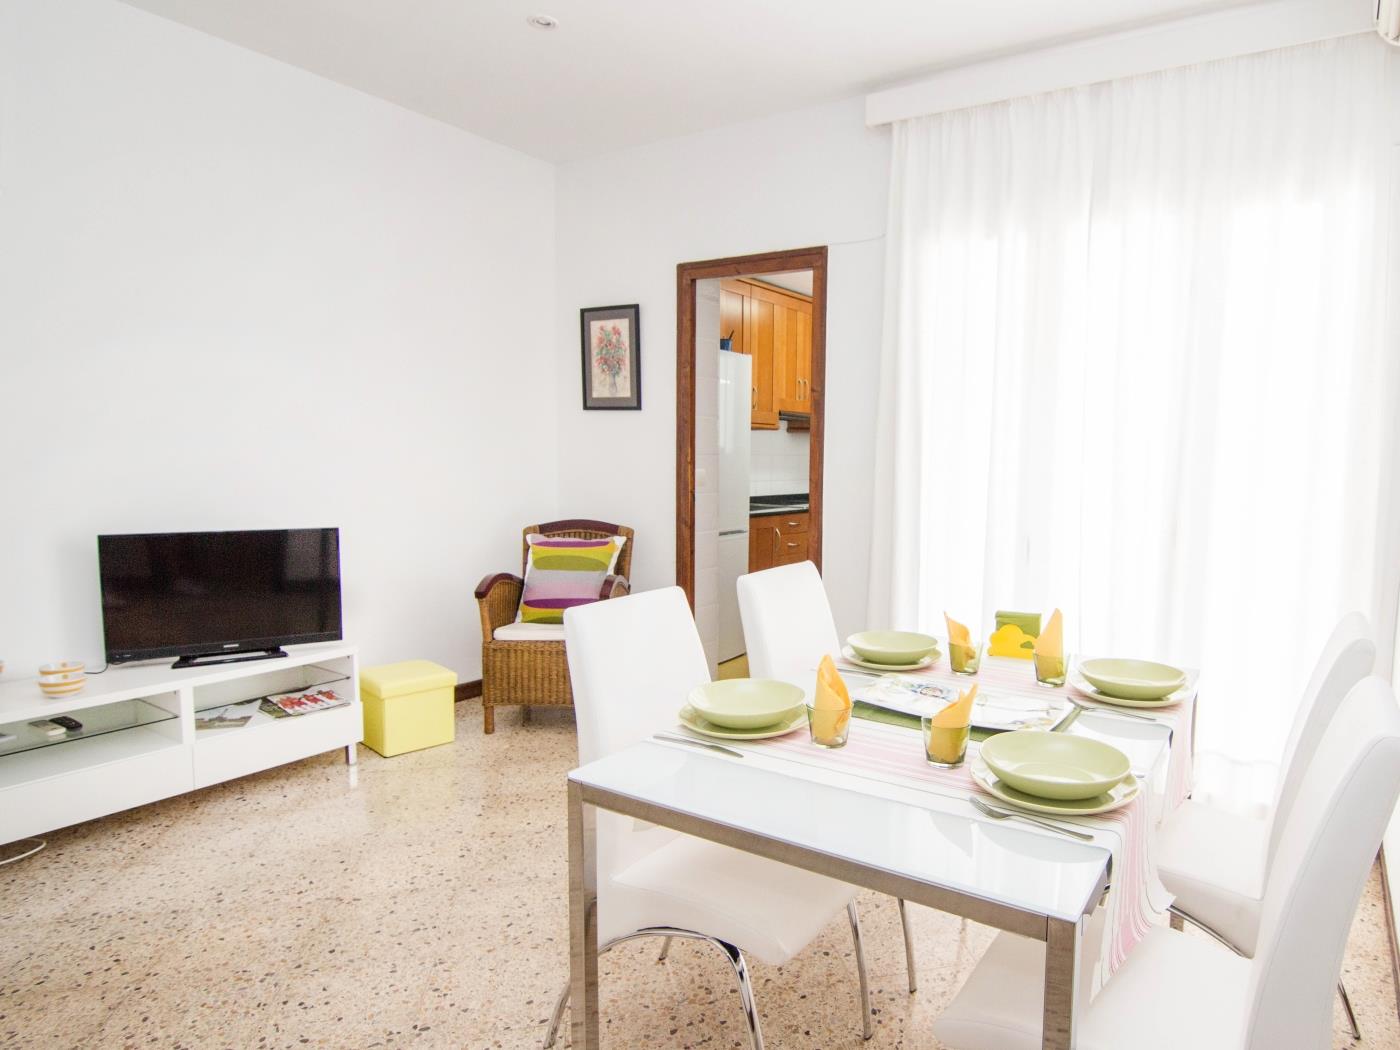 GRALLA BY BLAUSITGES Nice apartment in the center of Sitges. in SITGES